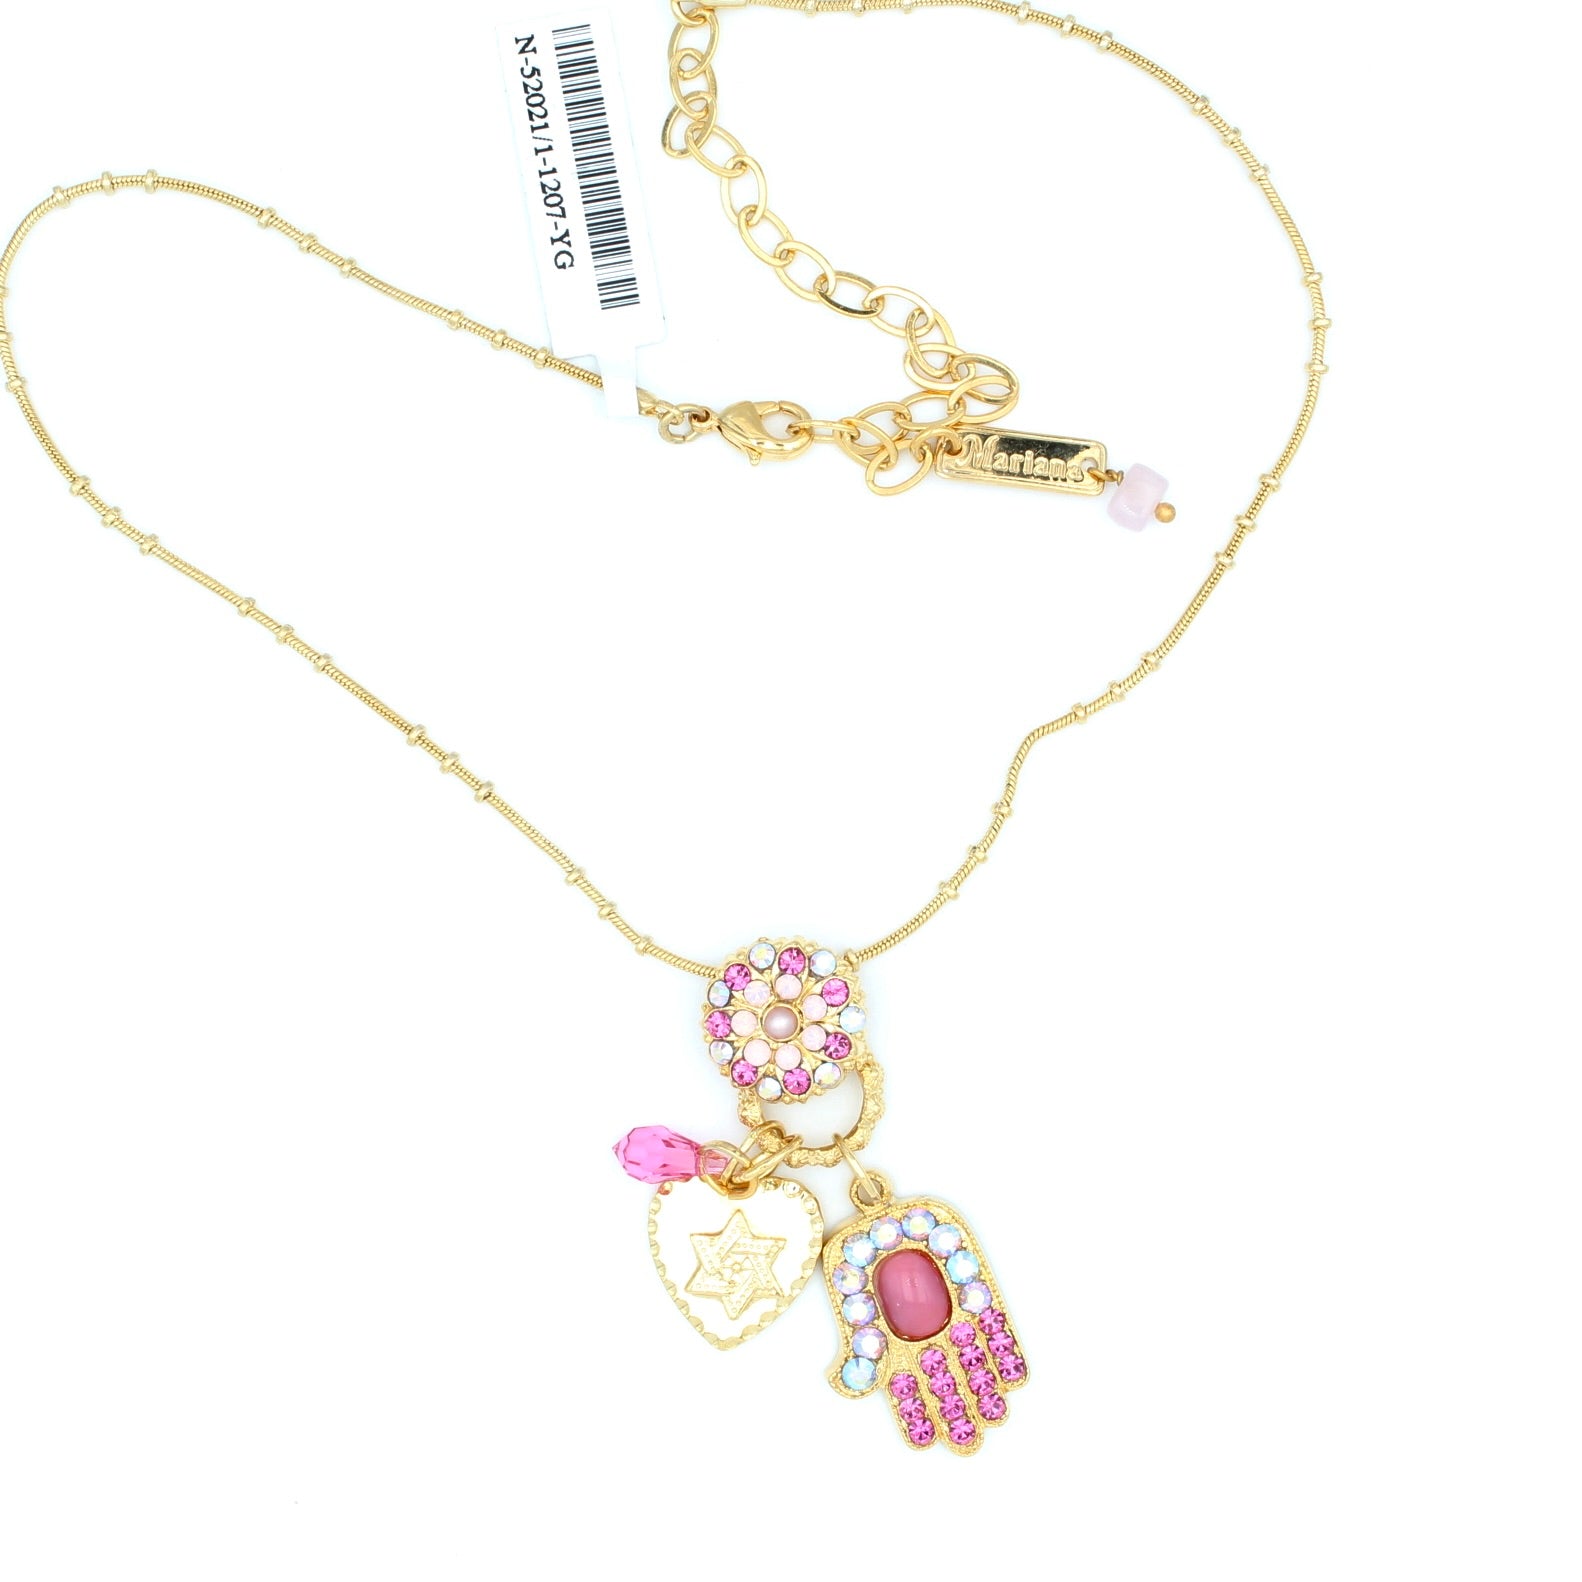 Smashing Pink Collection Hamsa Necklace in Gold - MaryTyke's